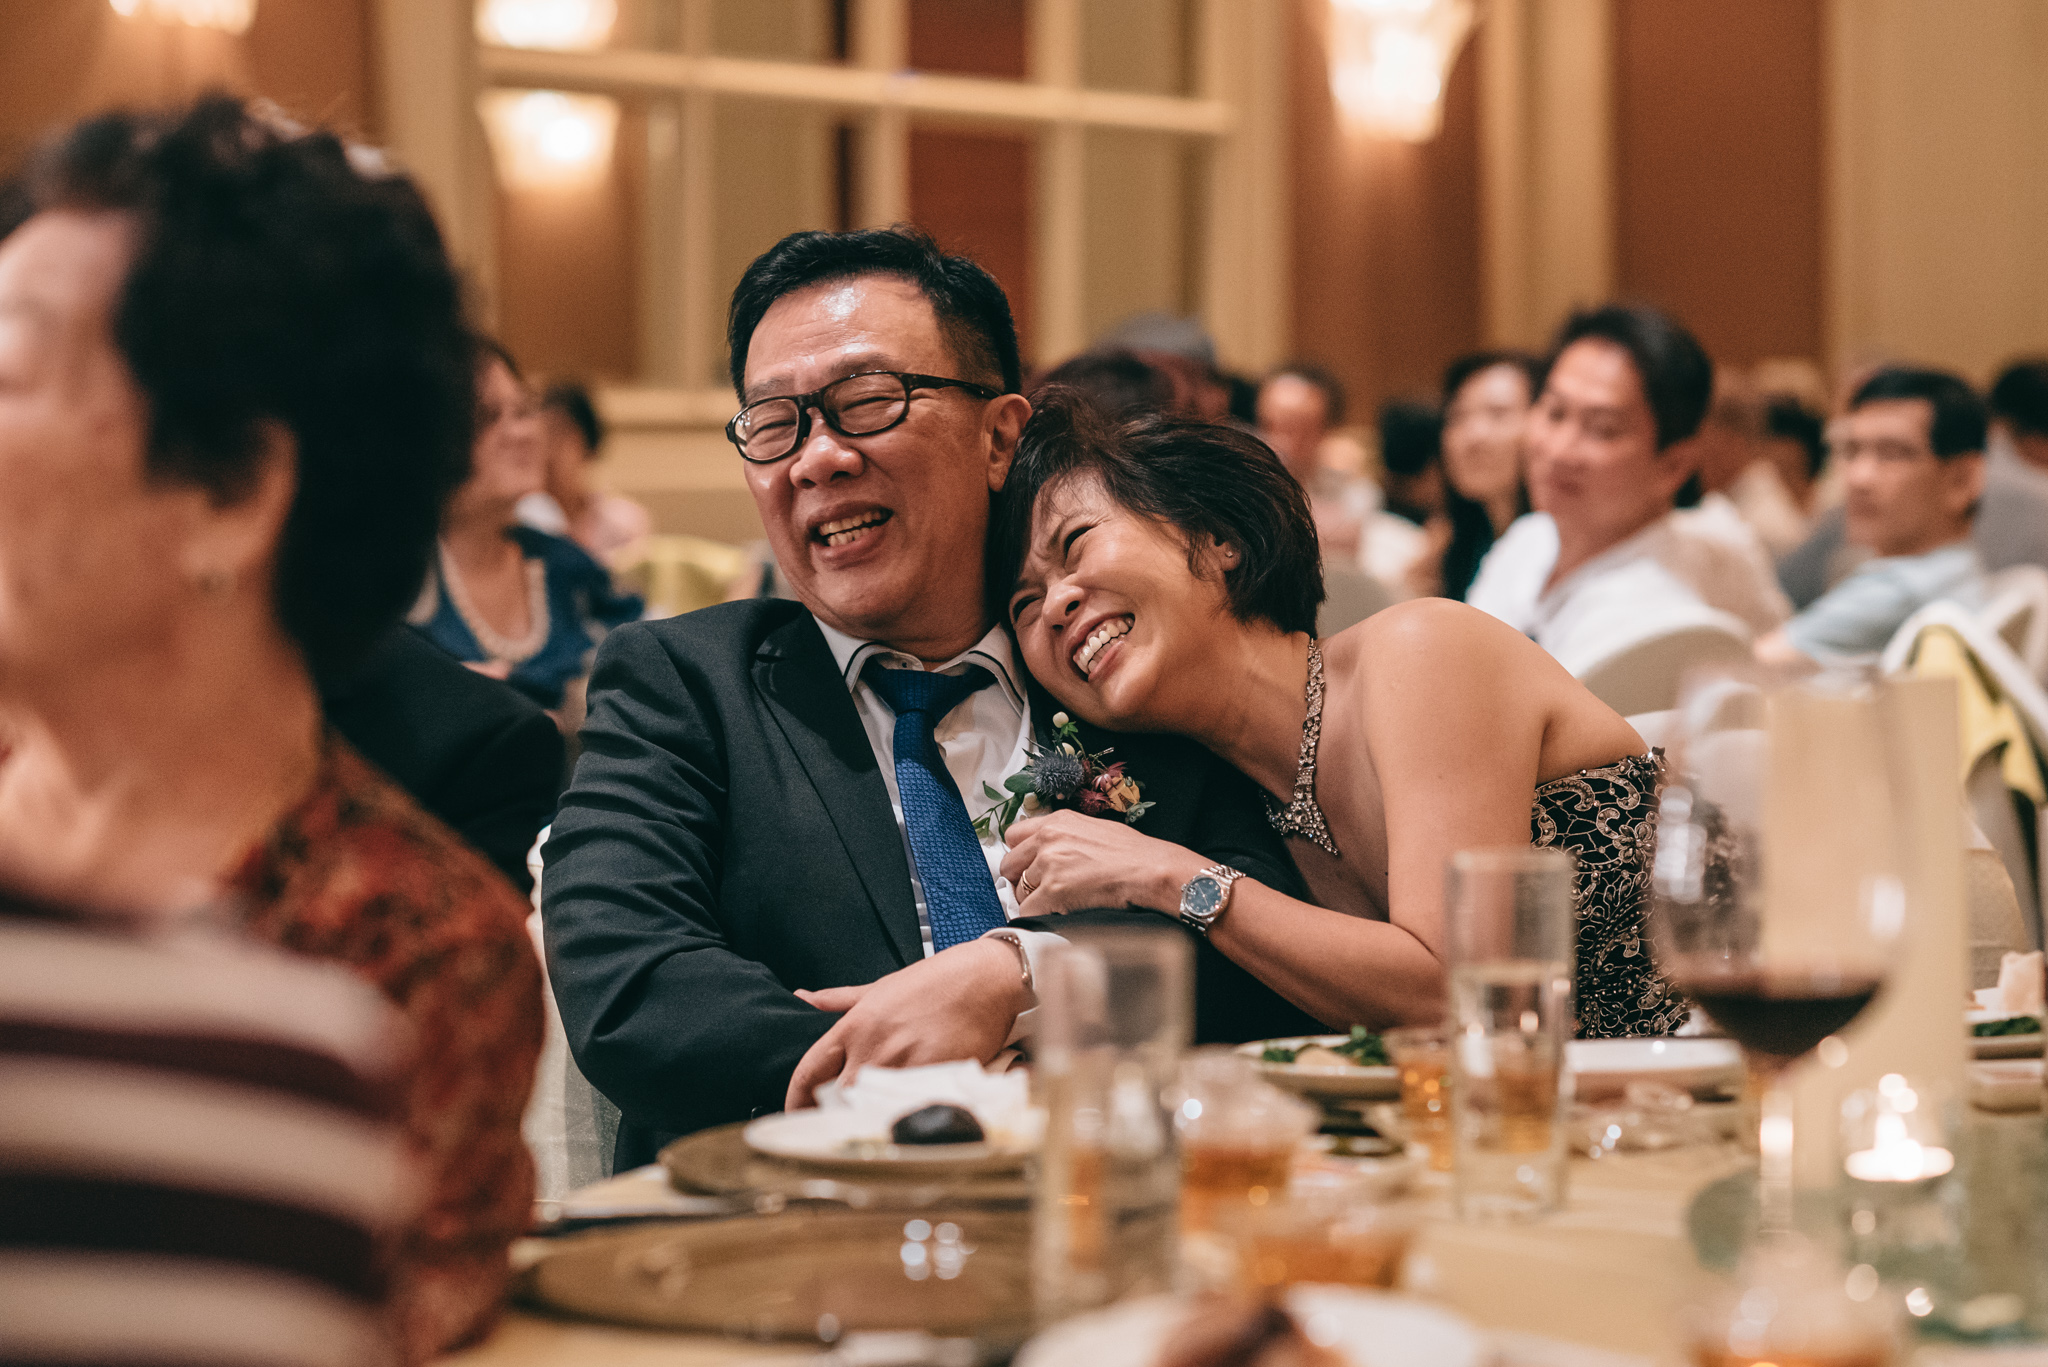 Eunice & Winshire Wedding Day Highlights (resized for sharing) - 224.jpg